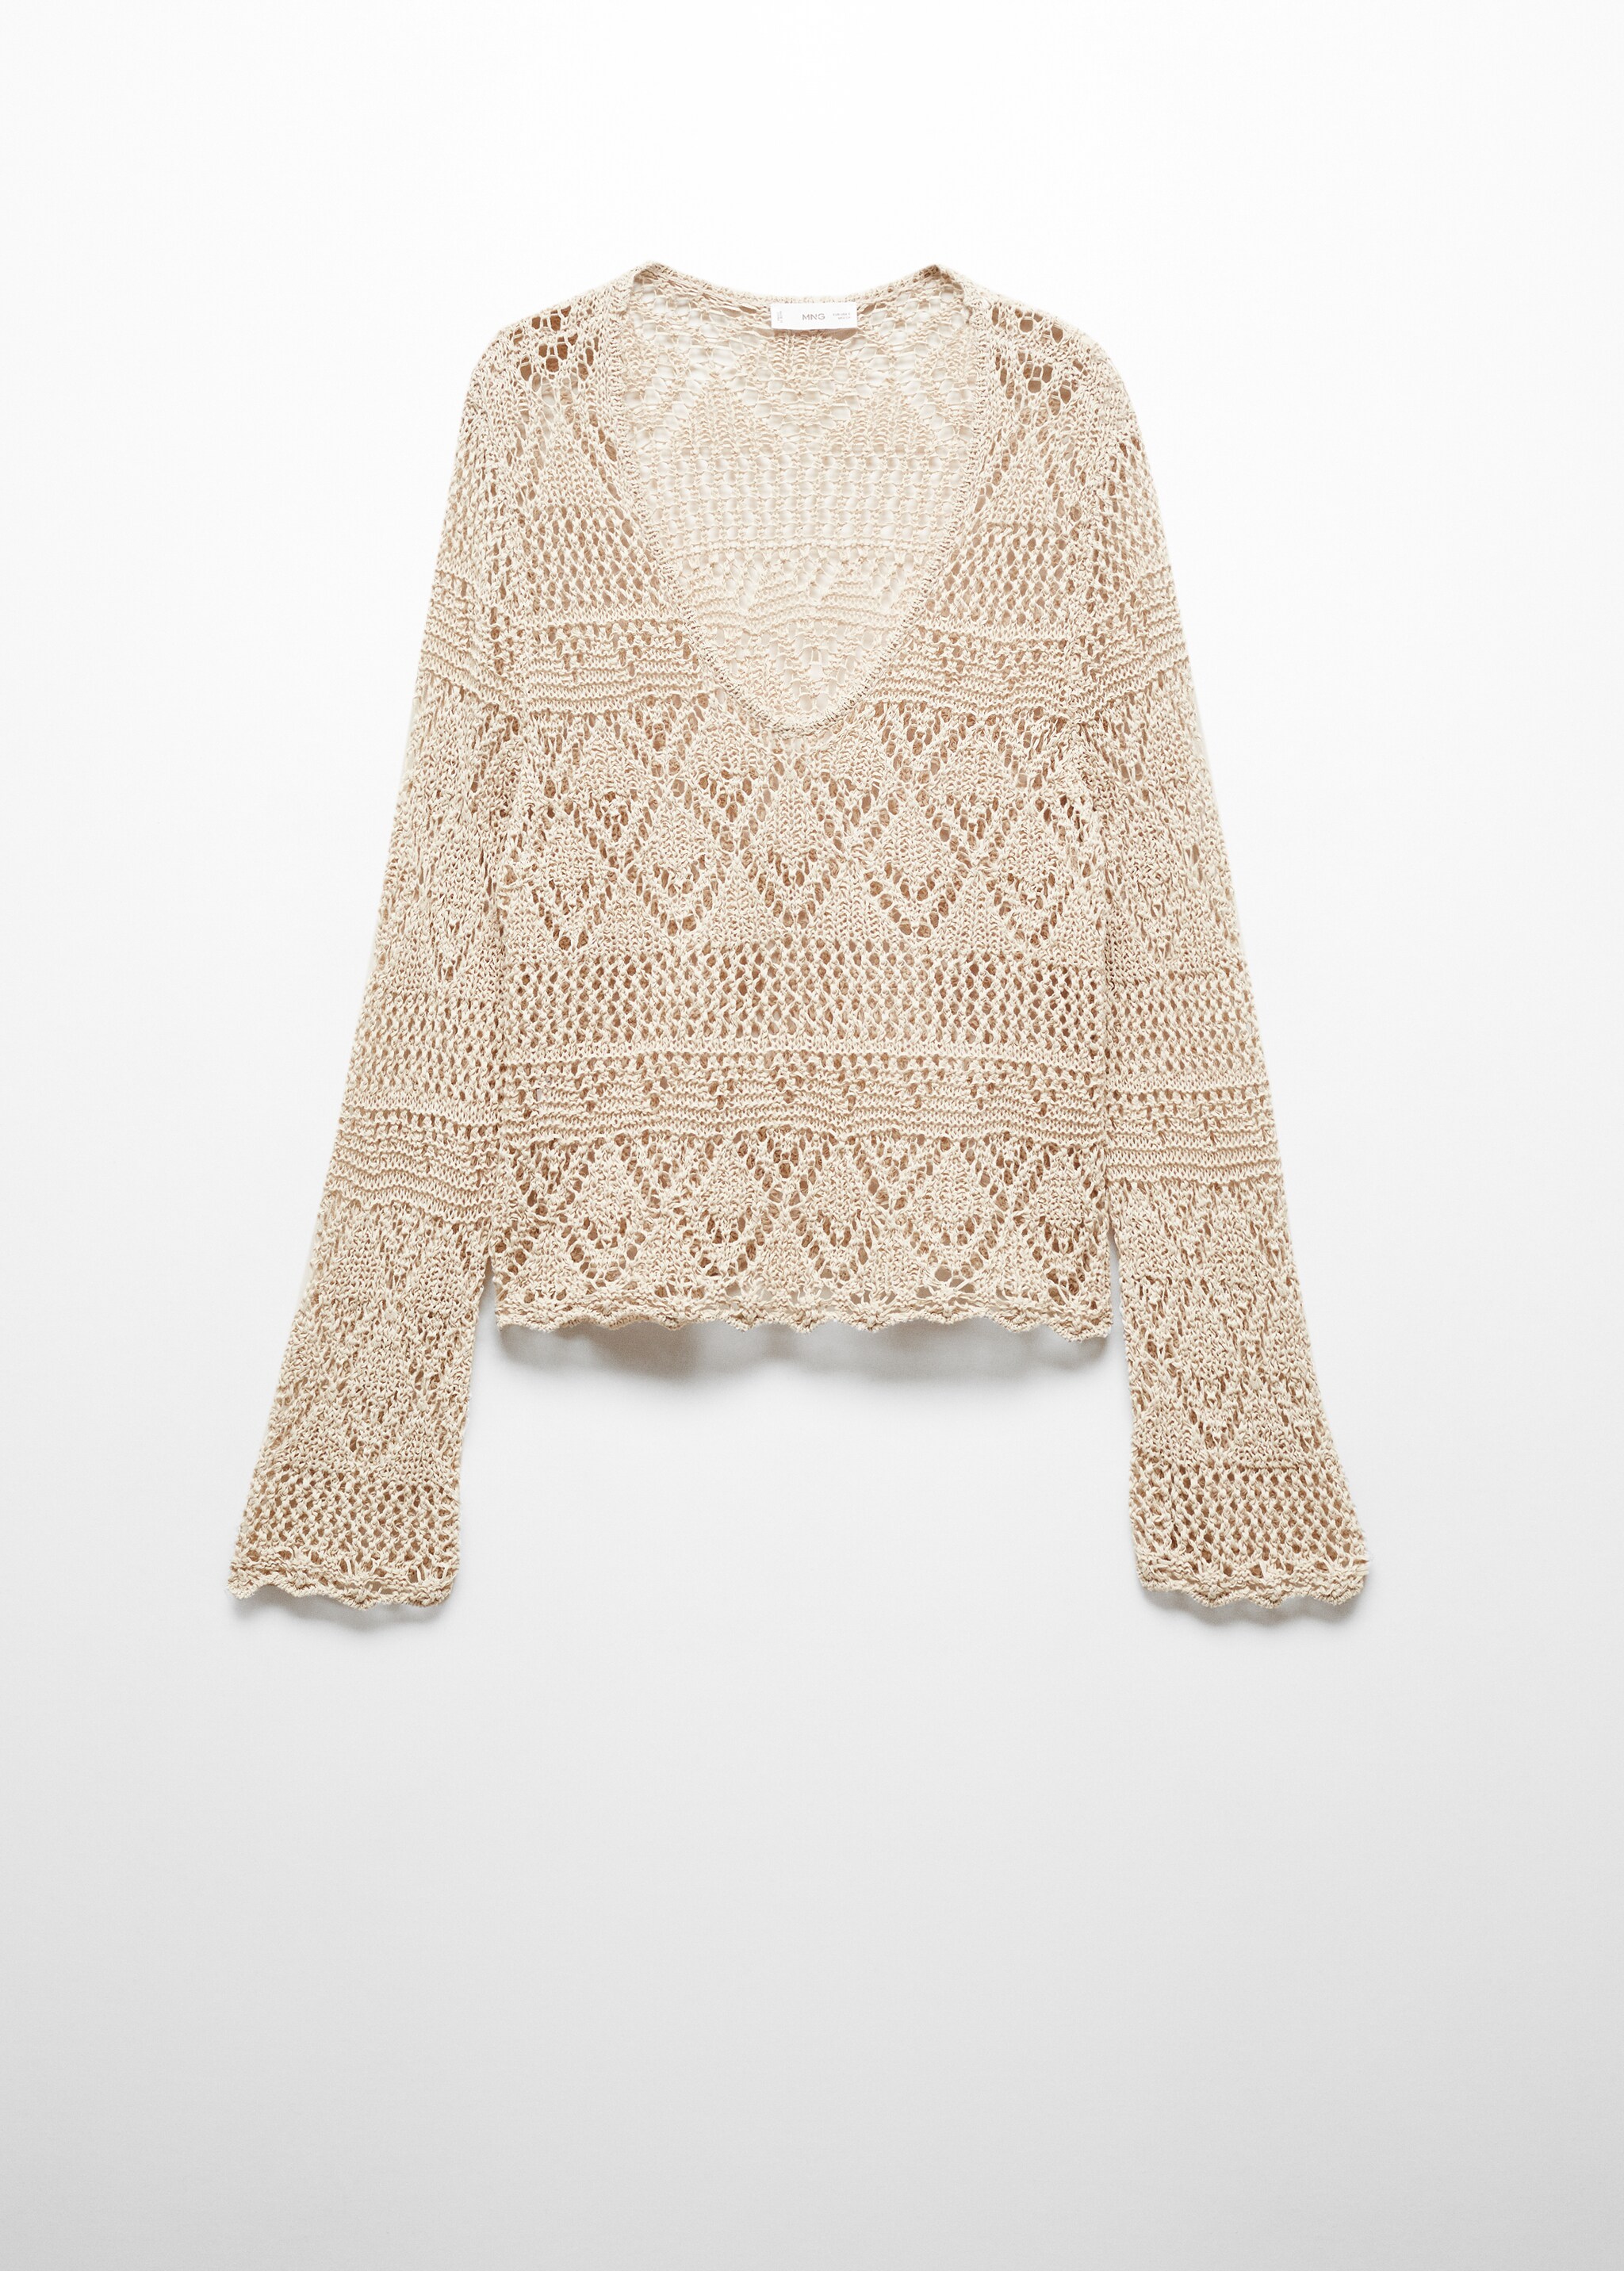 Openwork knit sweater - Article without model